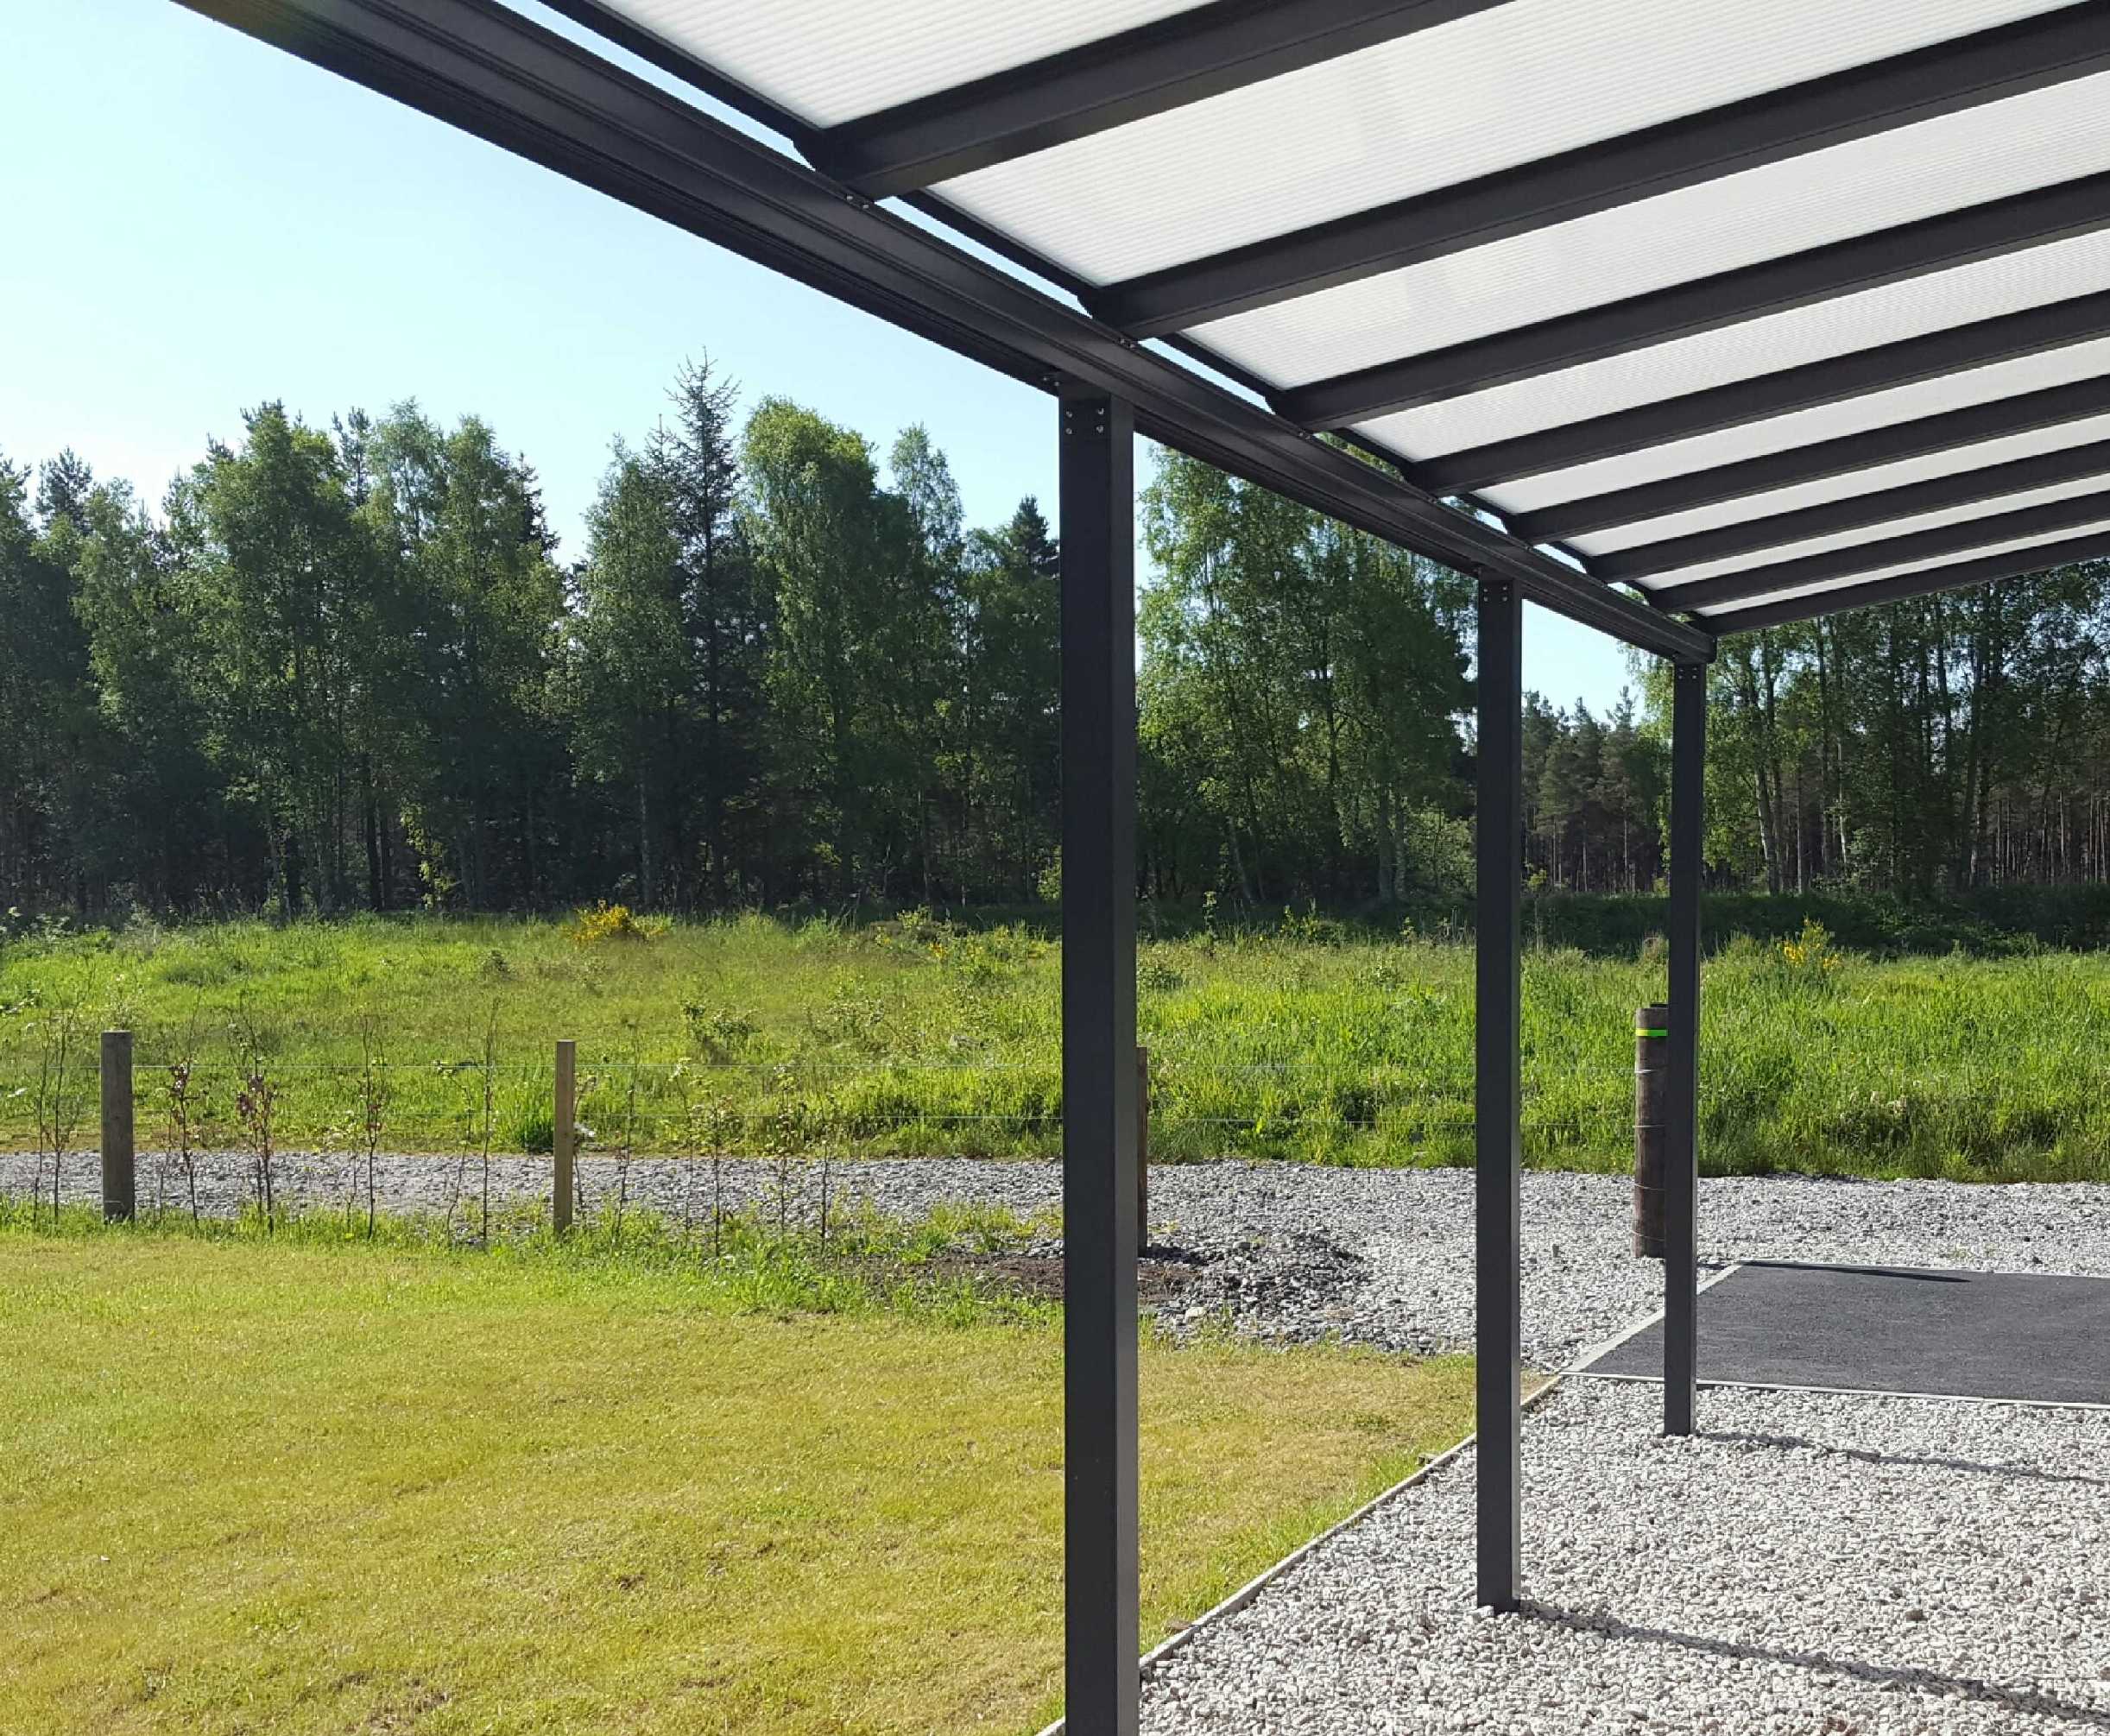 Omega Smart Lean-To Canopy, Anthracite Grey, 6mm Glass Clear Plate Polycarbonate Glazing - 6.3m (W) x 3.0m (P), (4) Supporting Posts